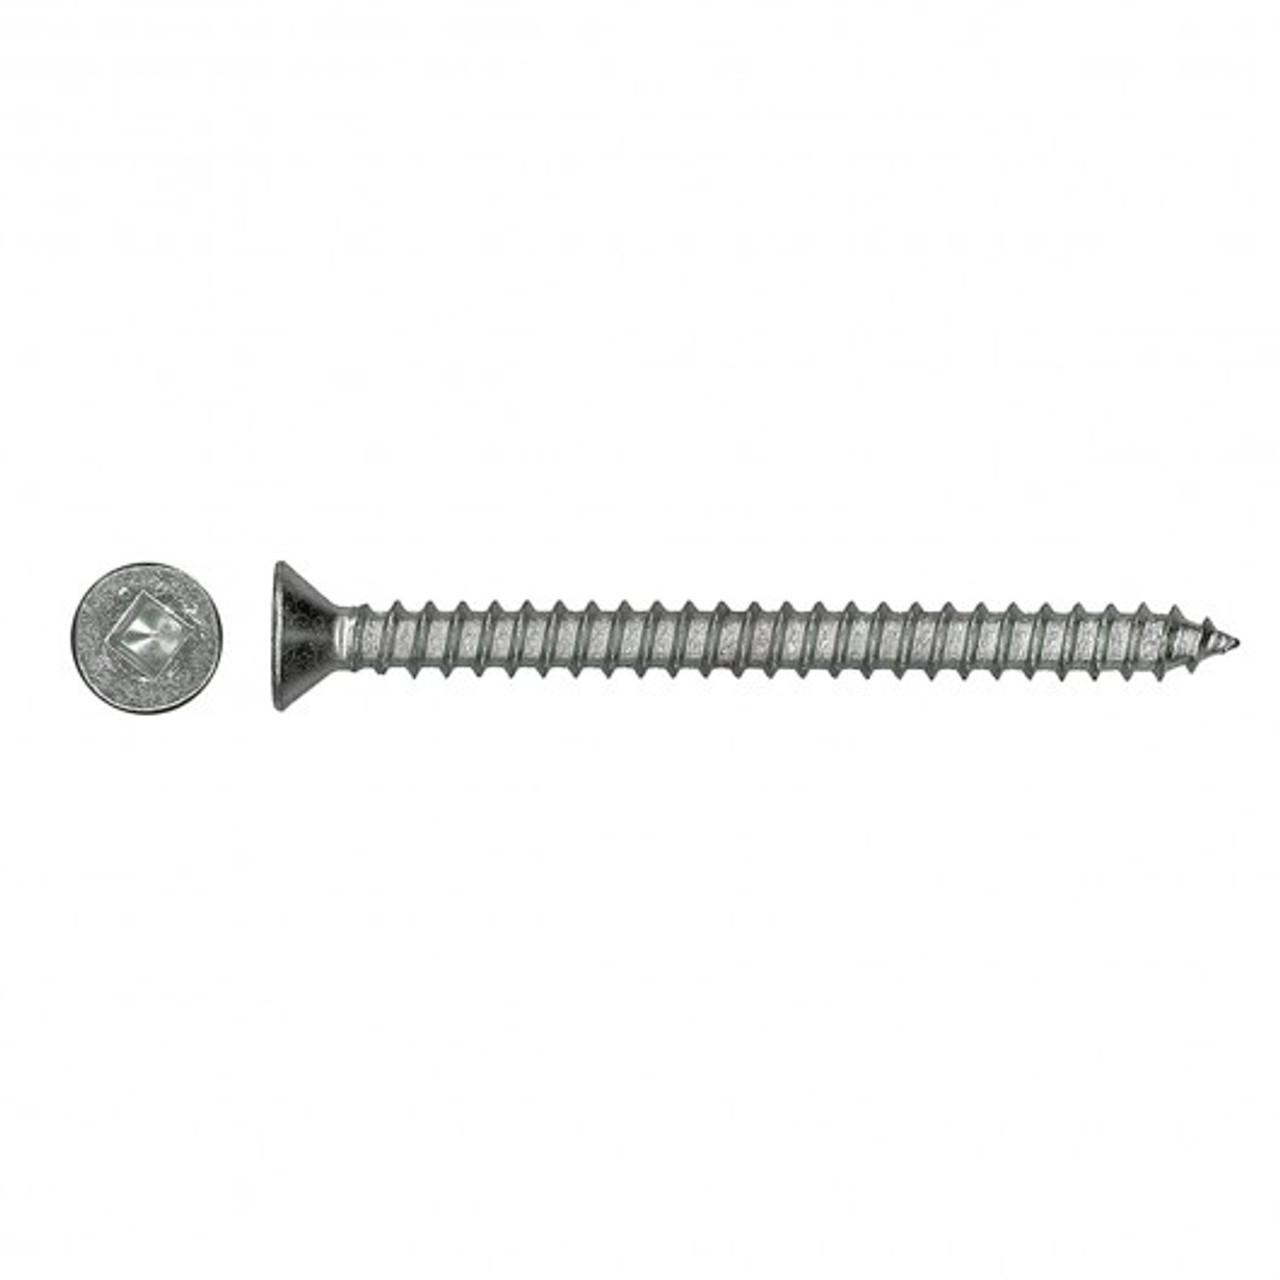 #12 x 3-1/2" Countersunk Stainless Steel Tapping Screw 100 Pc.   5162-263